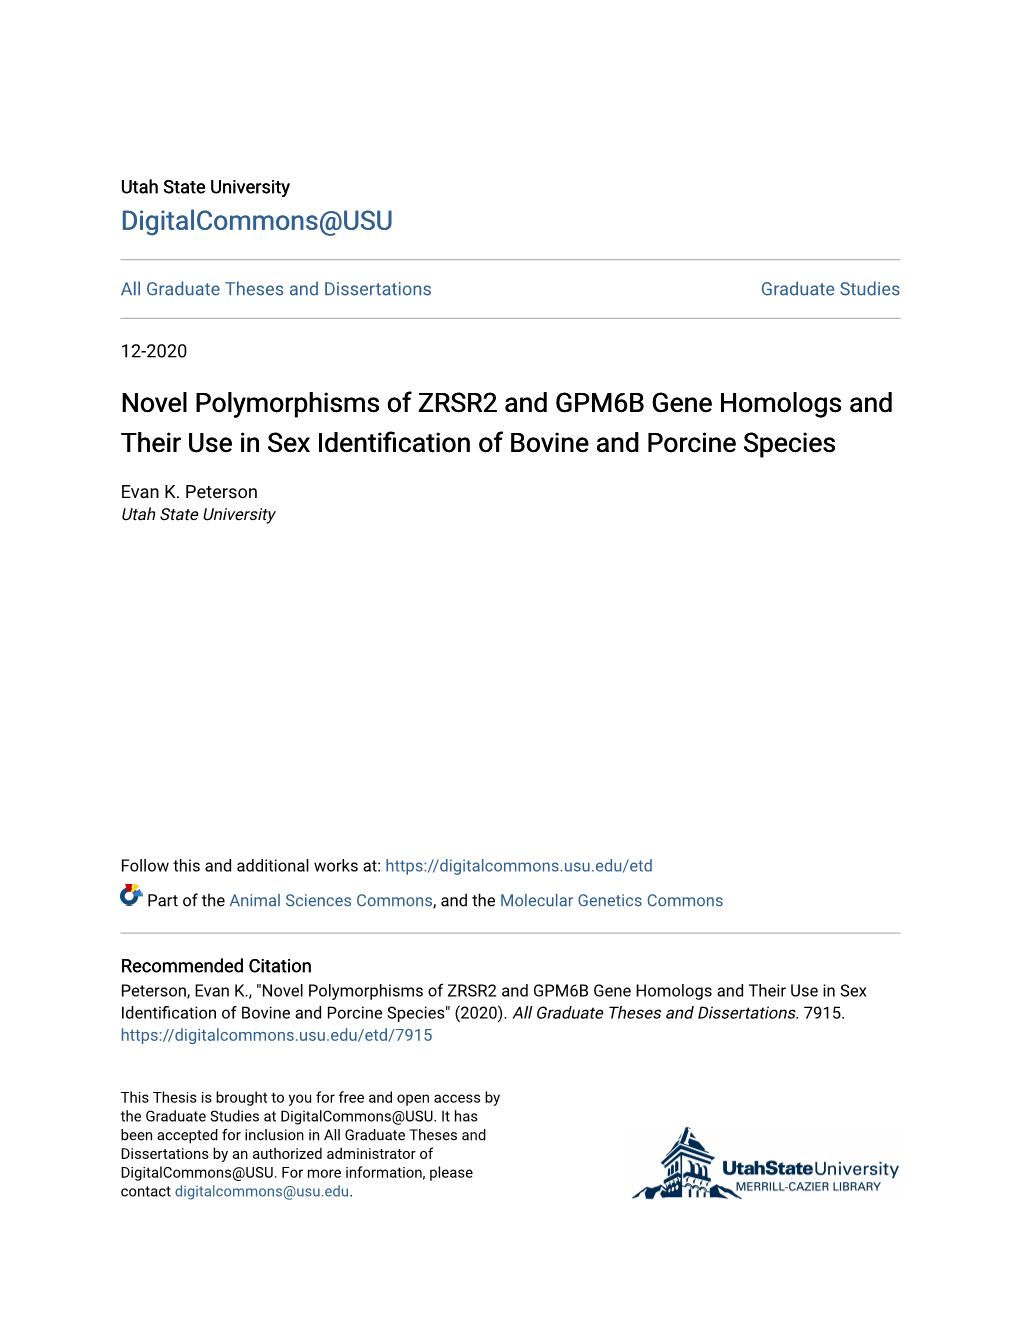 Novel Polymorphisms of ZRSR2 and GPM6B Gene Homologs and Their Use in Sex Identification of Bovine and Porcine Species